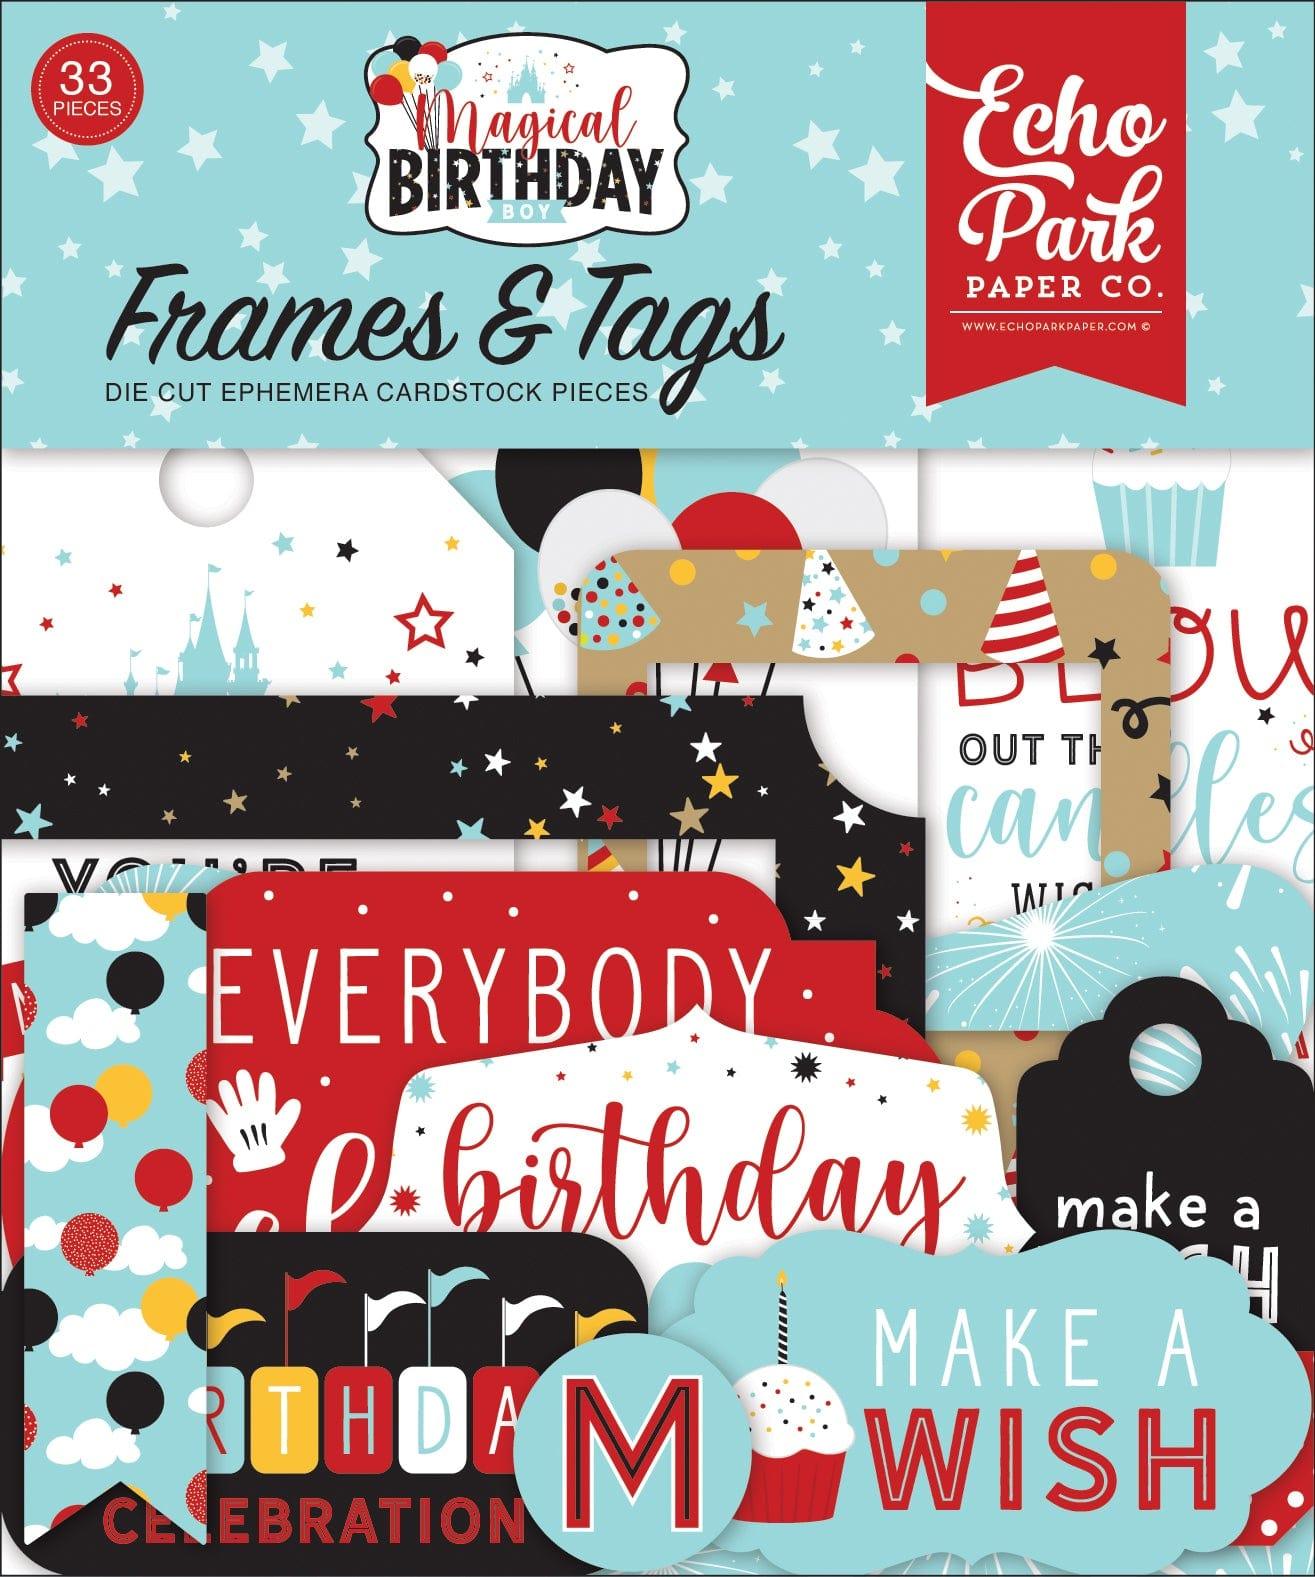 Magical Birthday Boy Collection 5 x 5 Frames & Tags Die Cut Scrapbook Embellishments by Echo Park Paper - Scrapbook Supply Companies